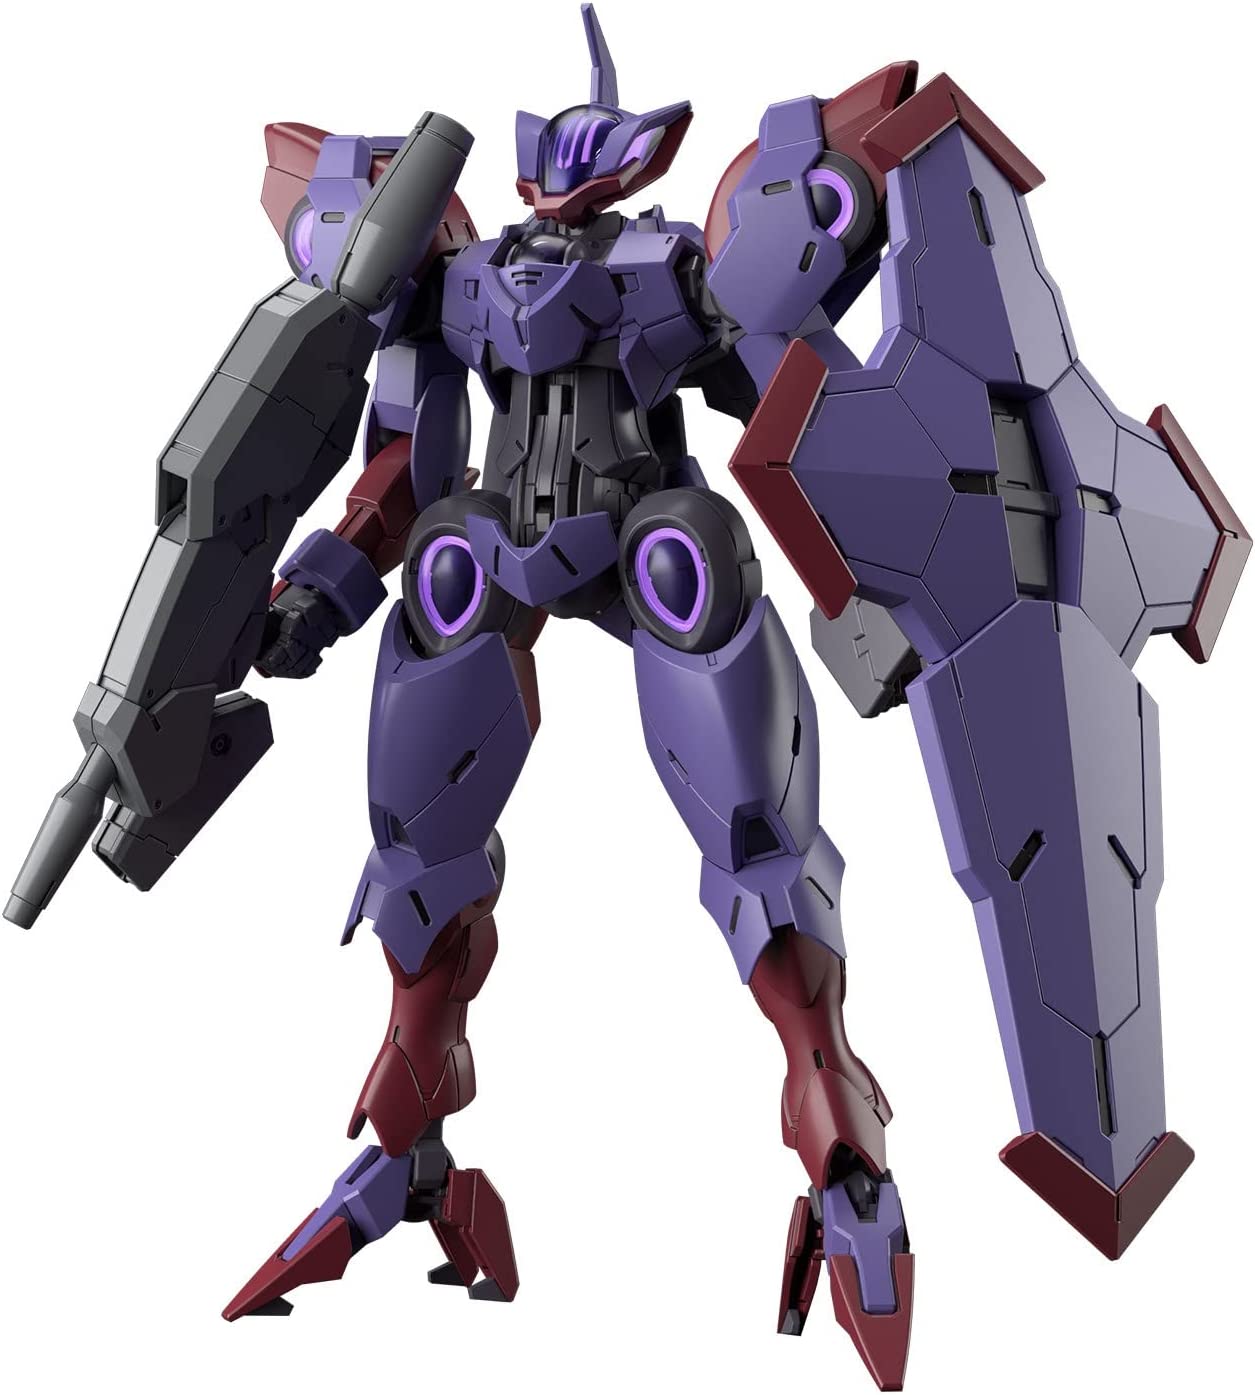 1/144 HG Beguir-Pente (Mobile Suit Gundam: The Witch from Mercur